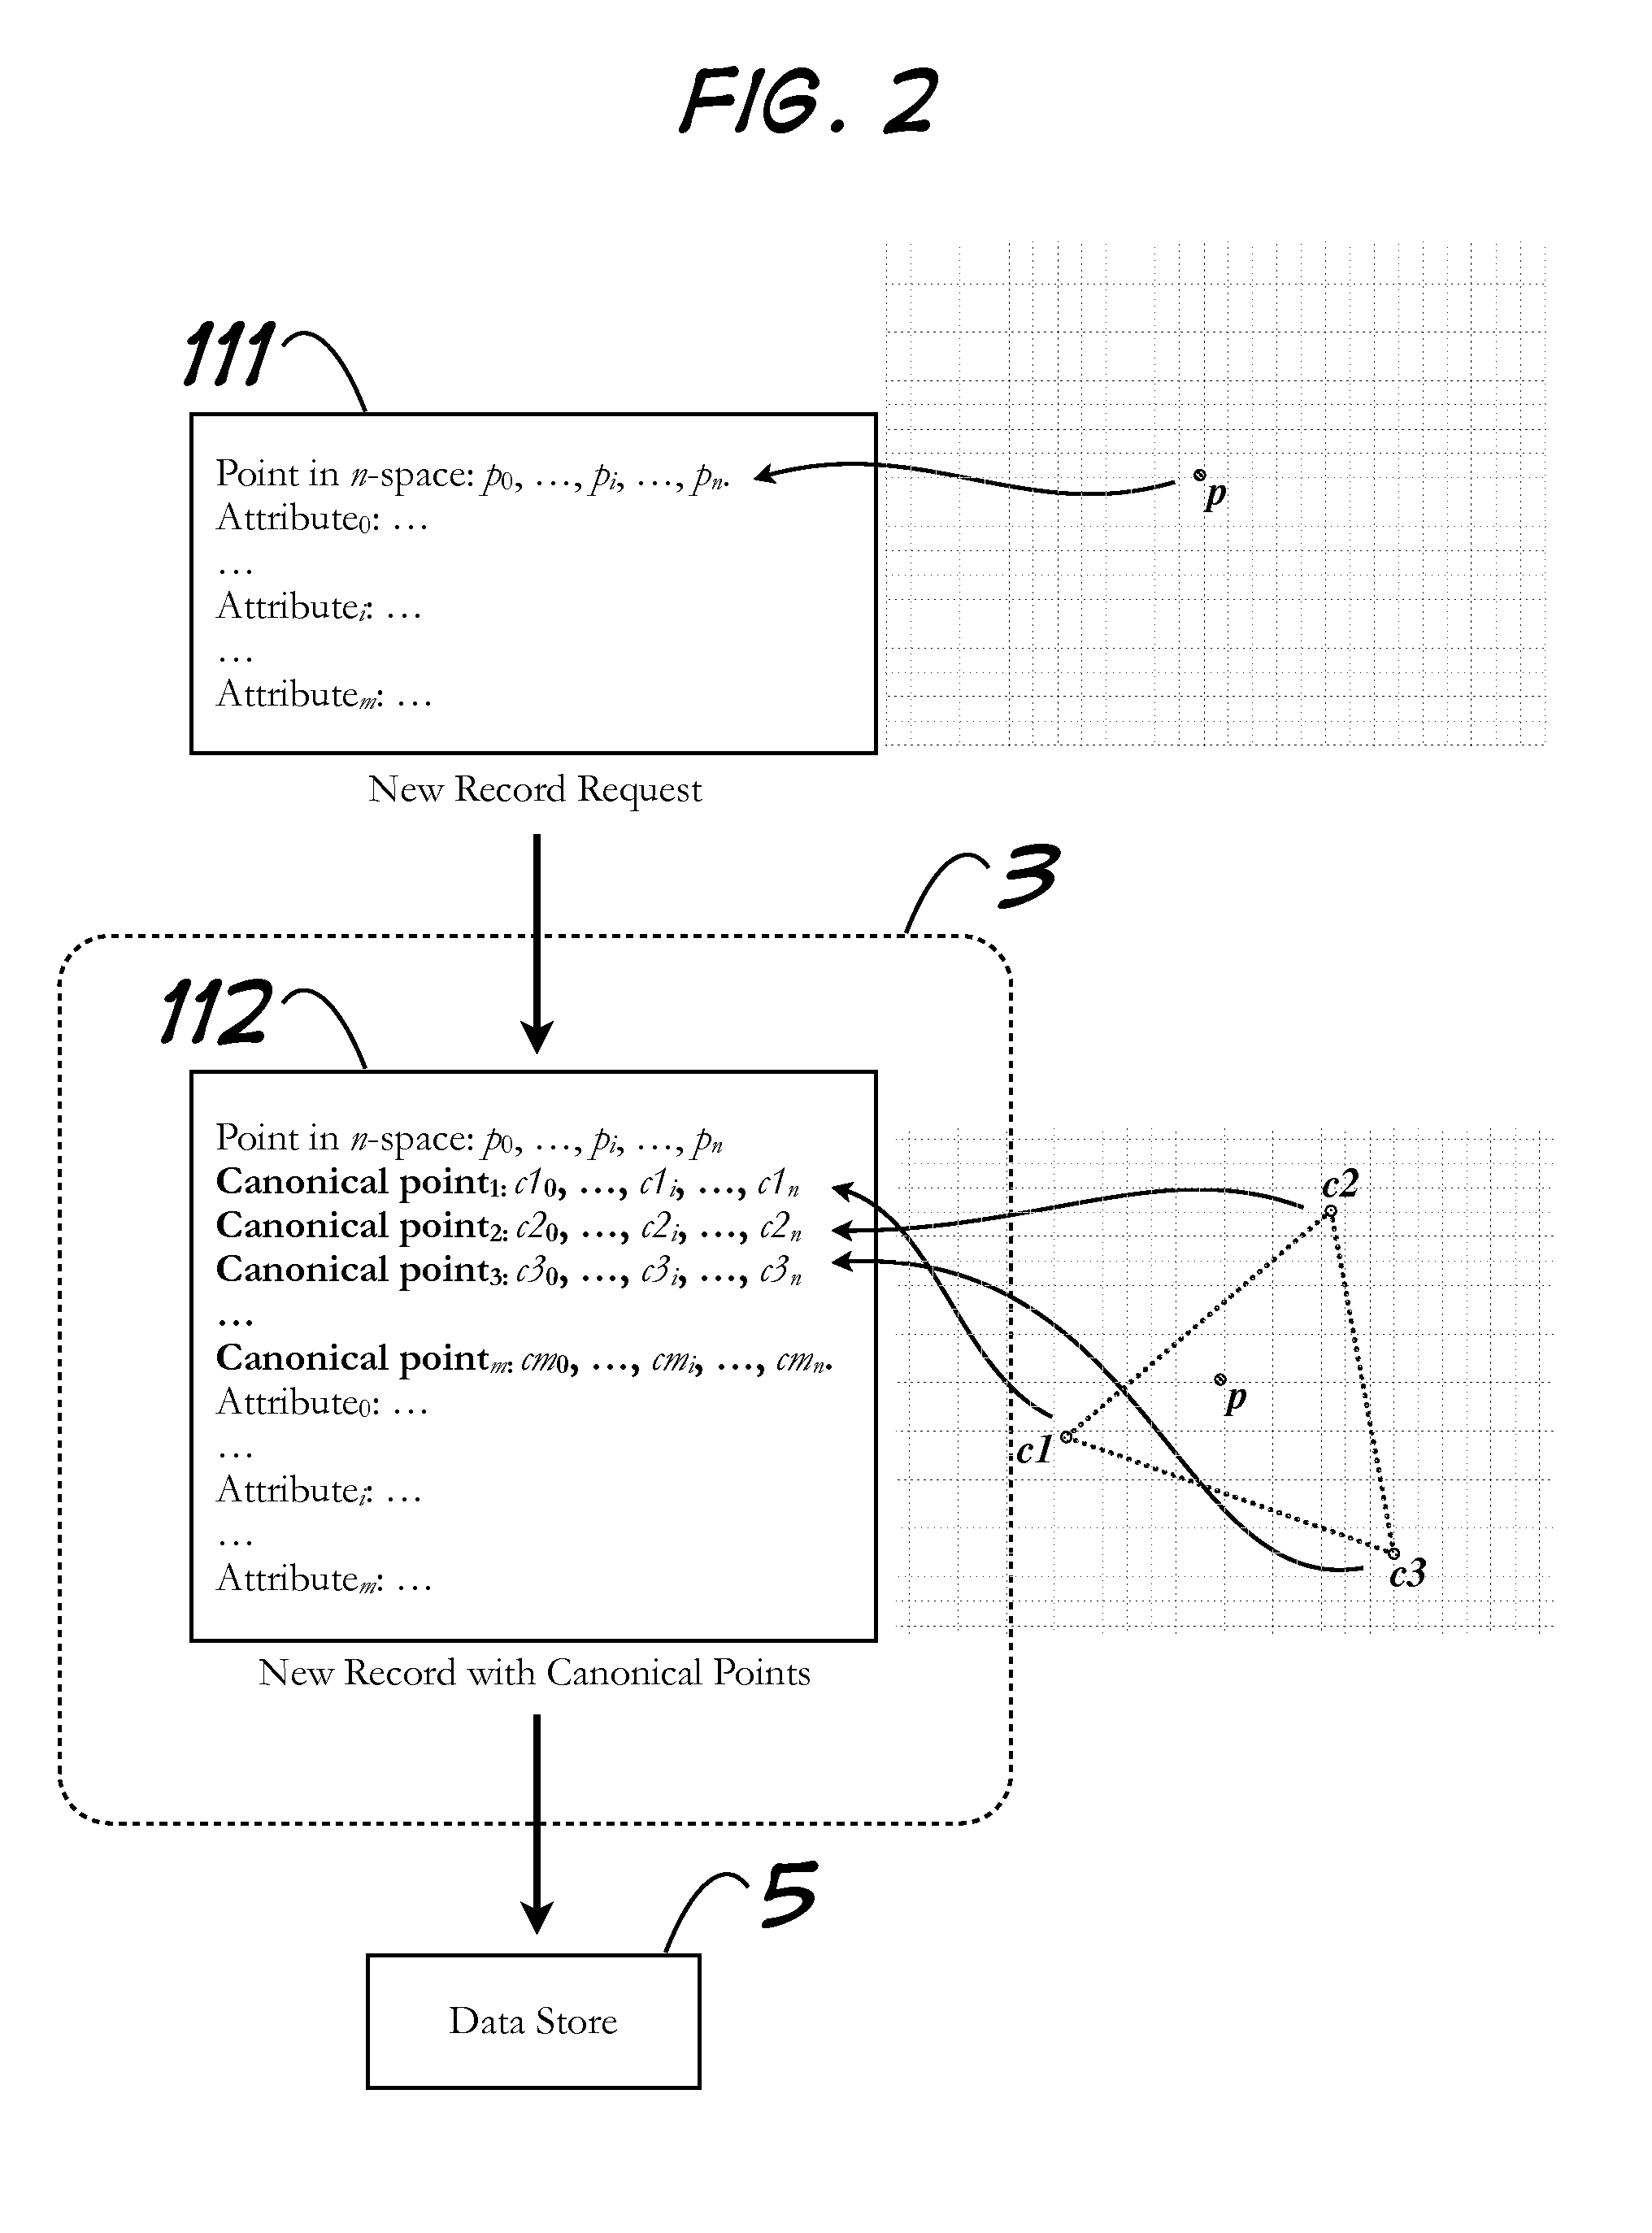 Storage of Arbitrary Points in N-Space and Retrieval of Subset thereof Based on Criteria Including Maximum Distance to an Arbitrary Reference Point